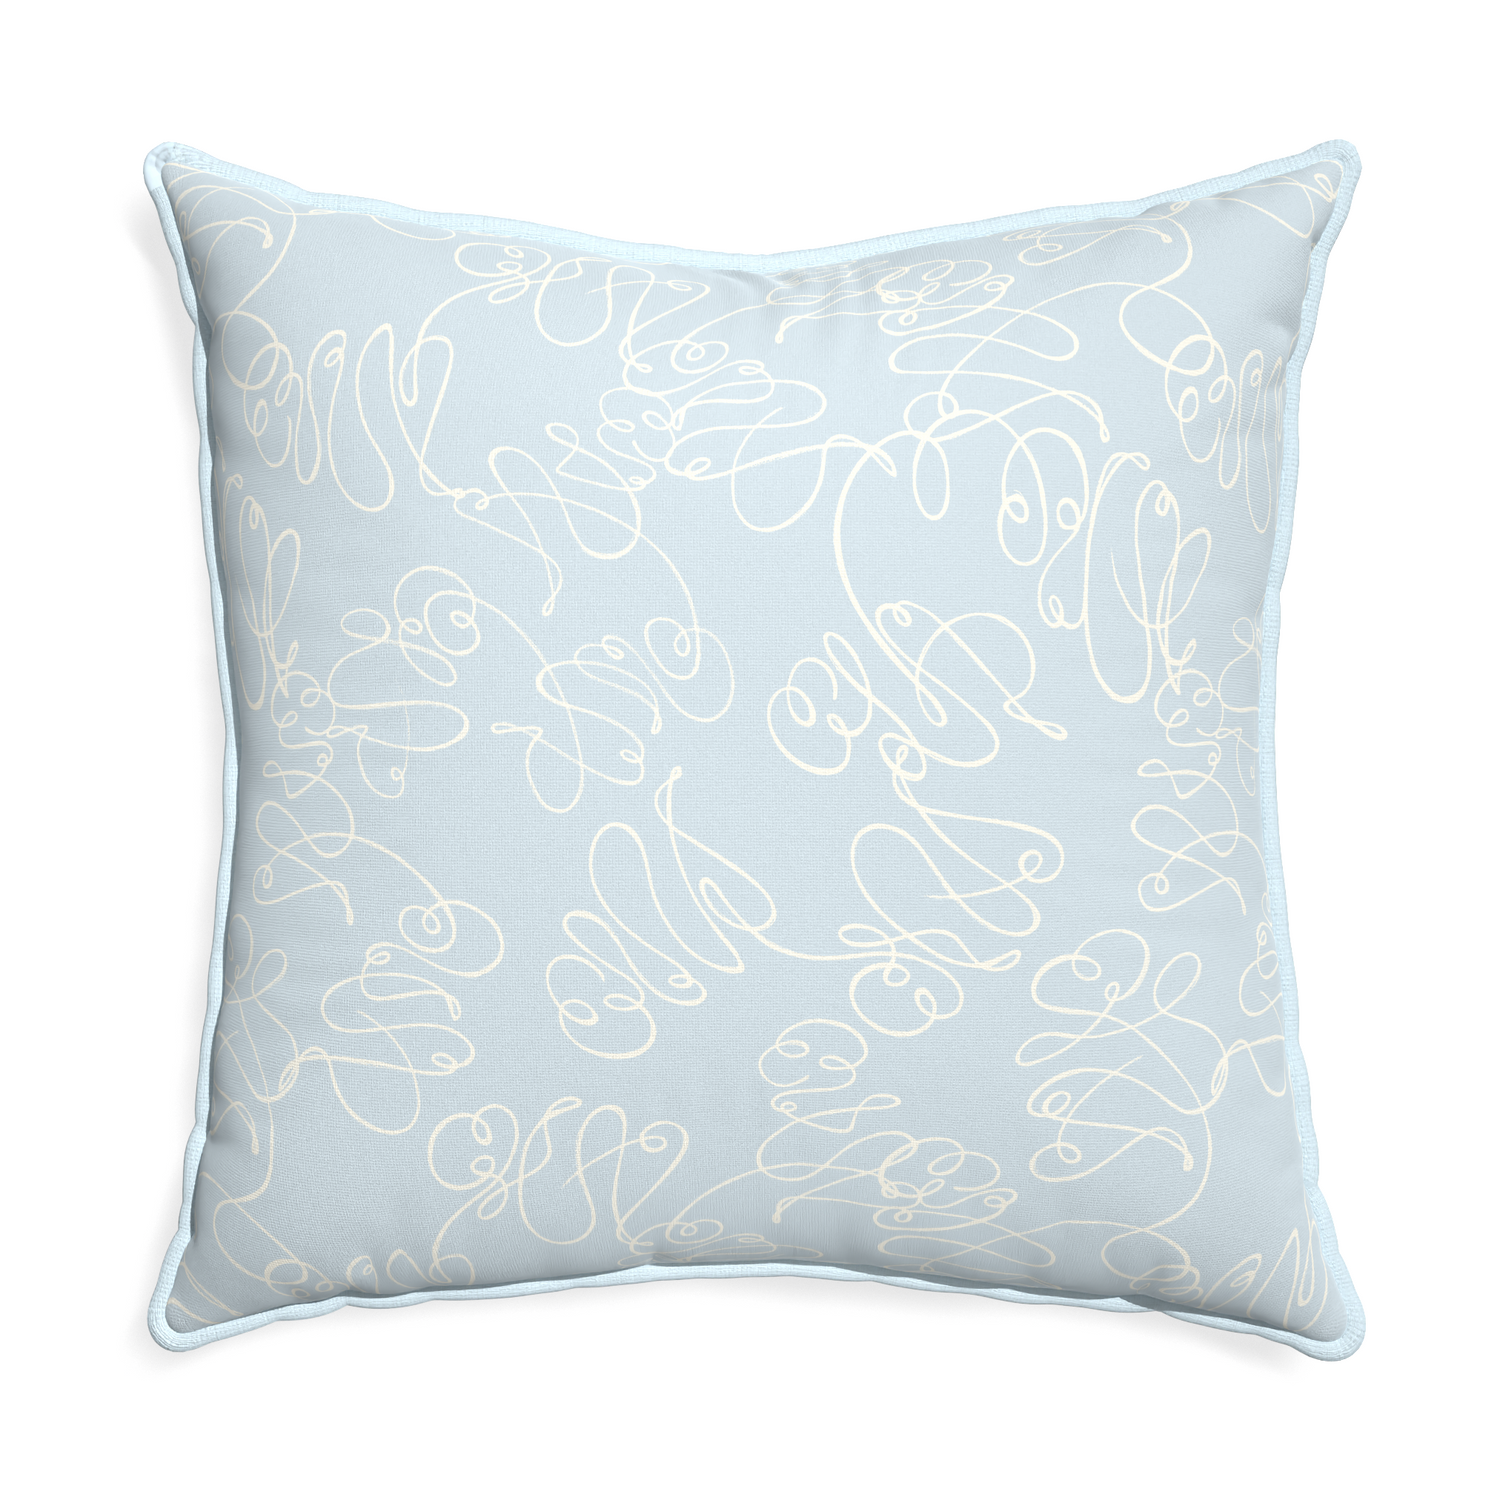 Euro-sham mirabella custom powder blue abstractpillow with powder piping on white background